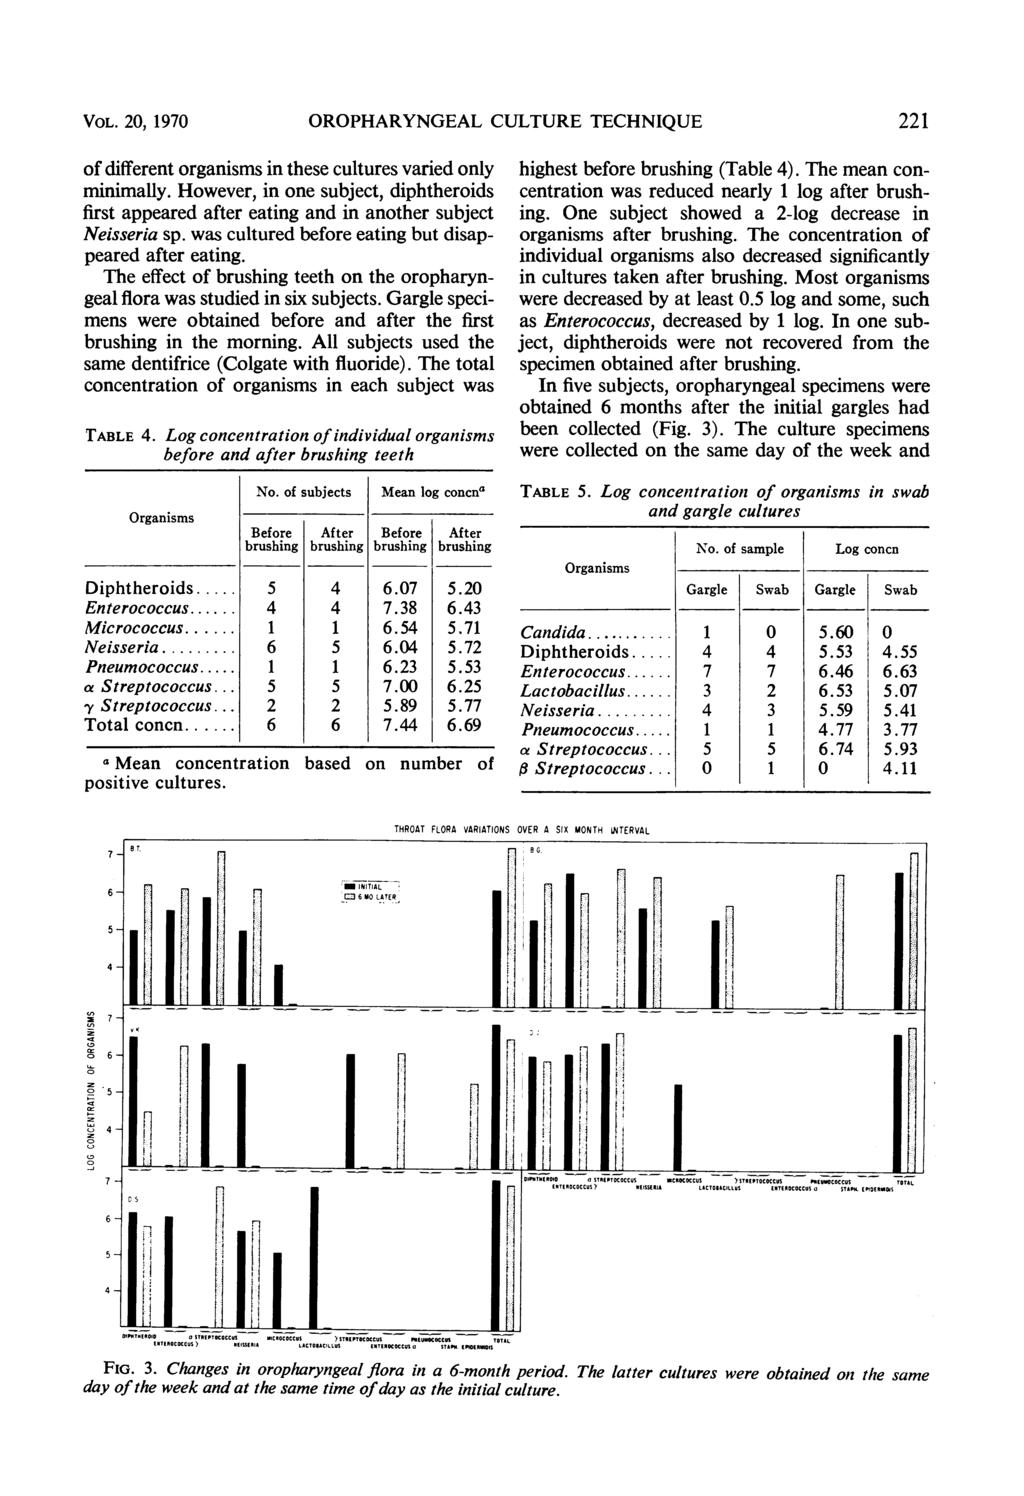 VOL. 20, 1970 OROPHARYNGEAL CULTURE TECHNIQUE 221 of different organisms in these cultures varied only minimally.